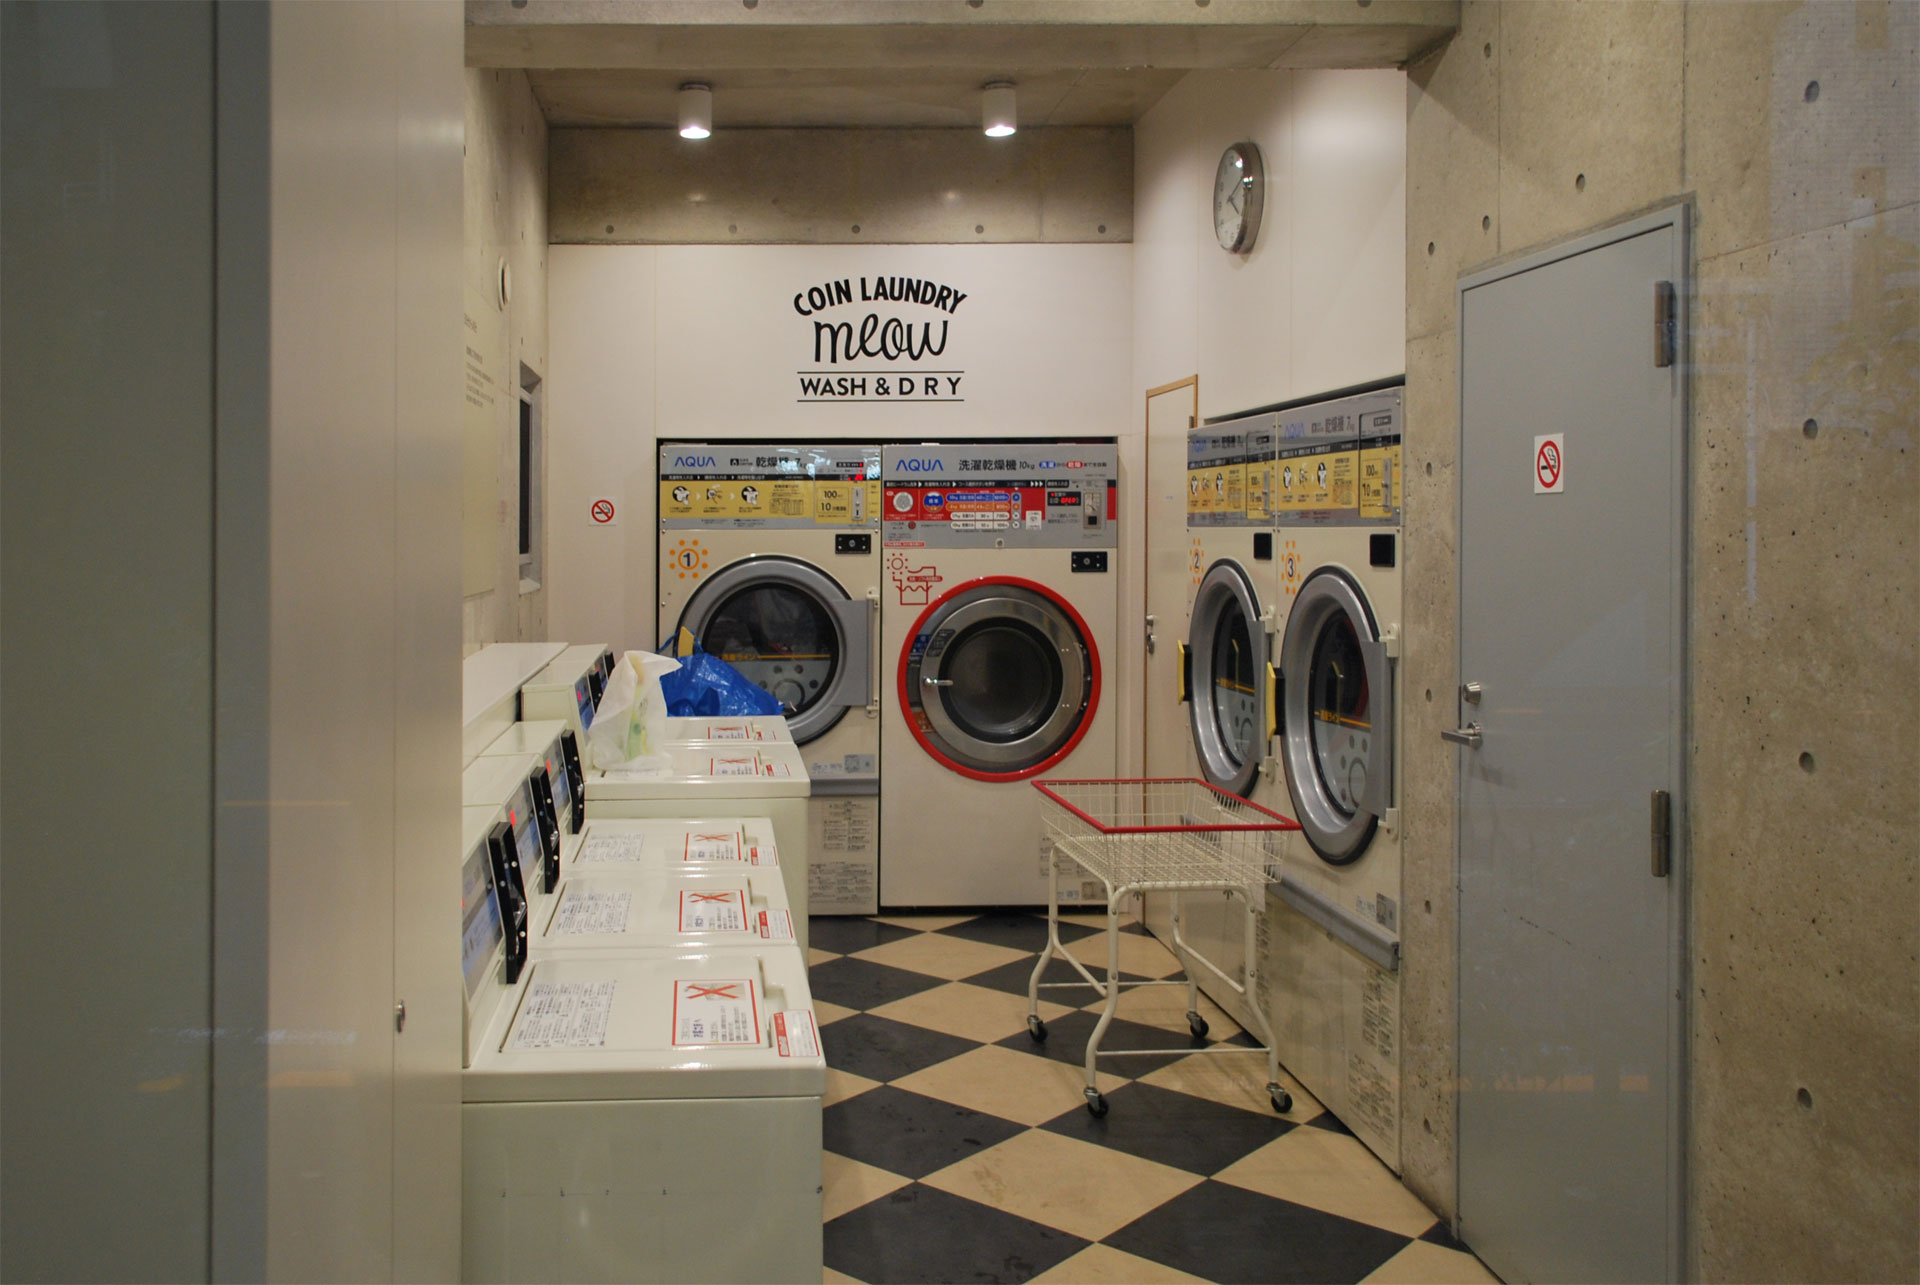 「COIN LAUNDRY meow西尾久店」(東京都荒川区)